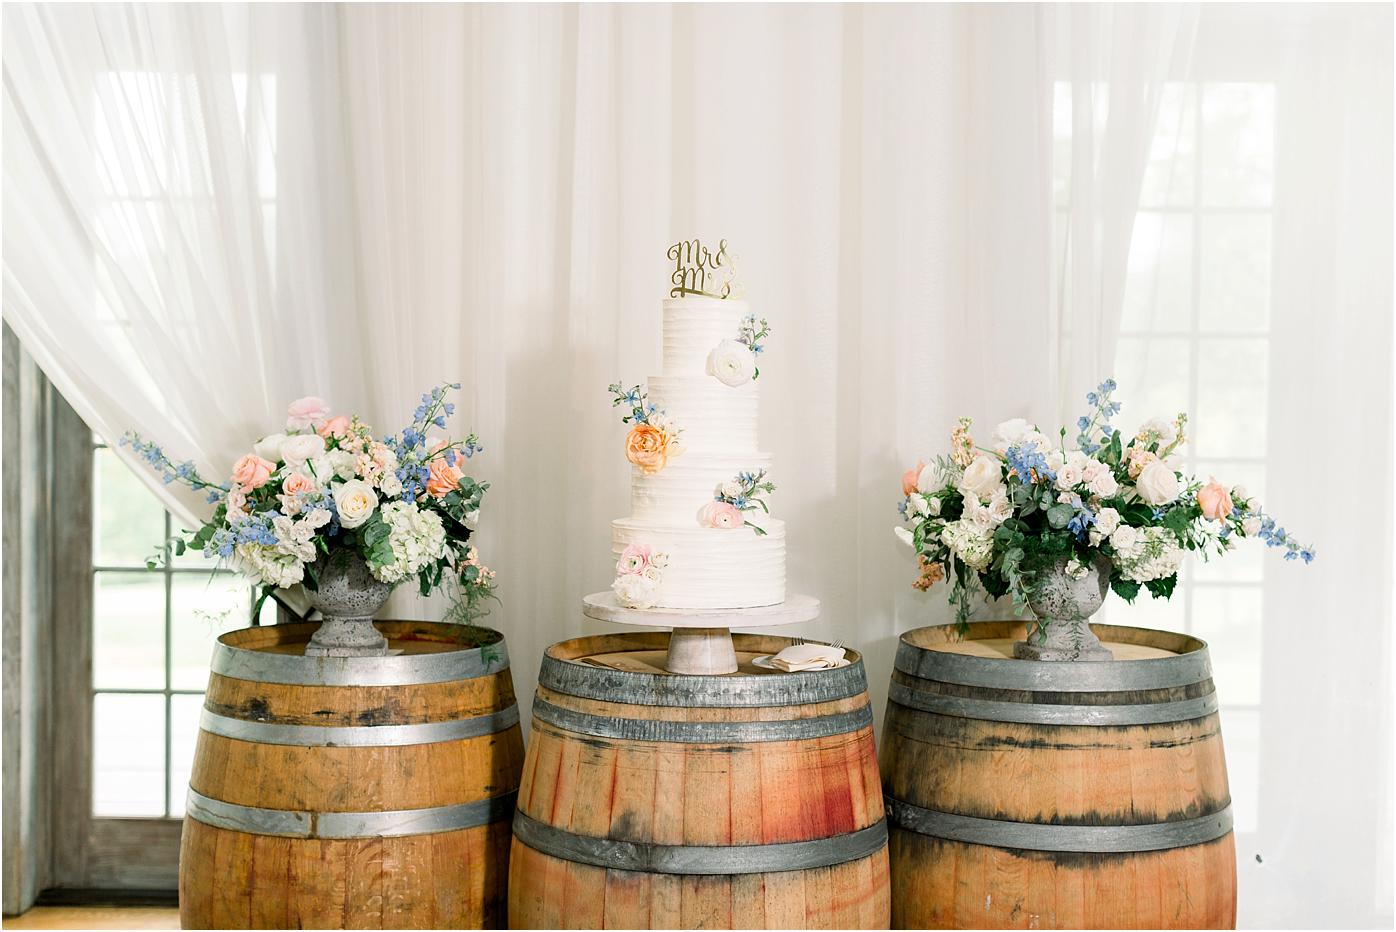 A stunning three tiered vanilla frosted wedding cake on a wine barrel for the bride and groom's Veritas Winery wedding